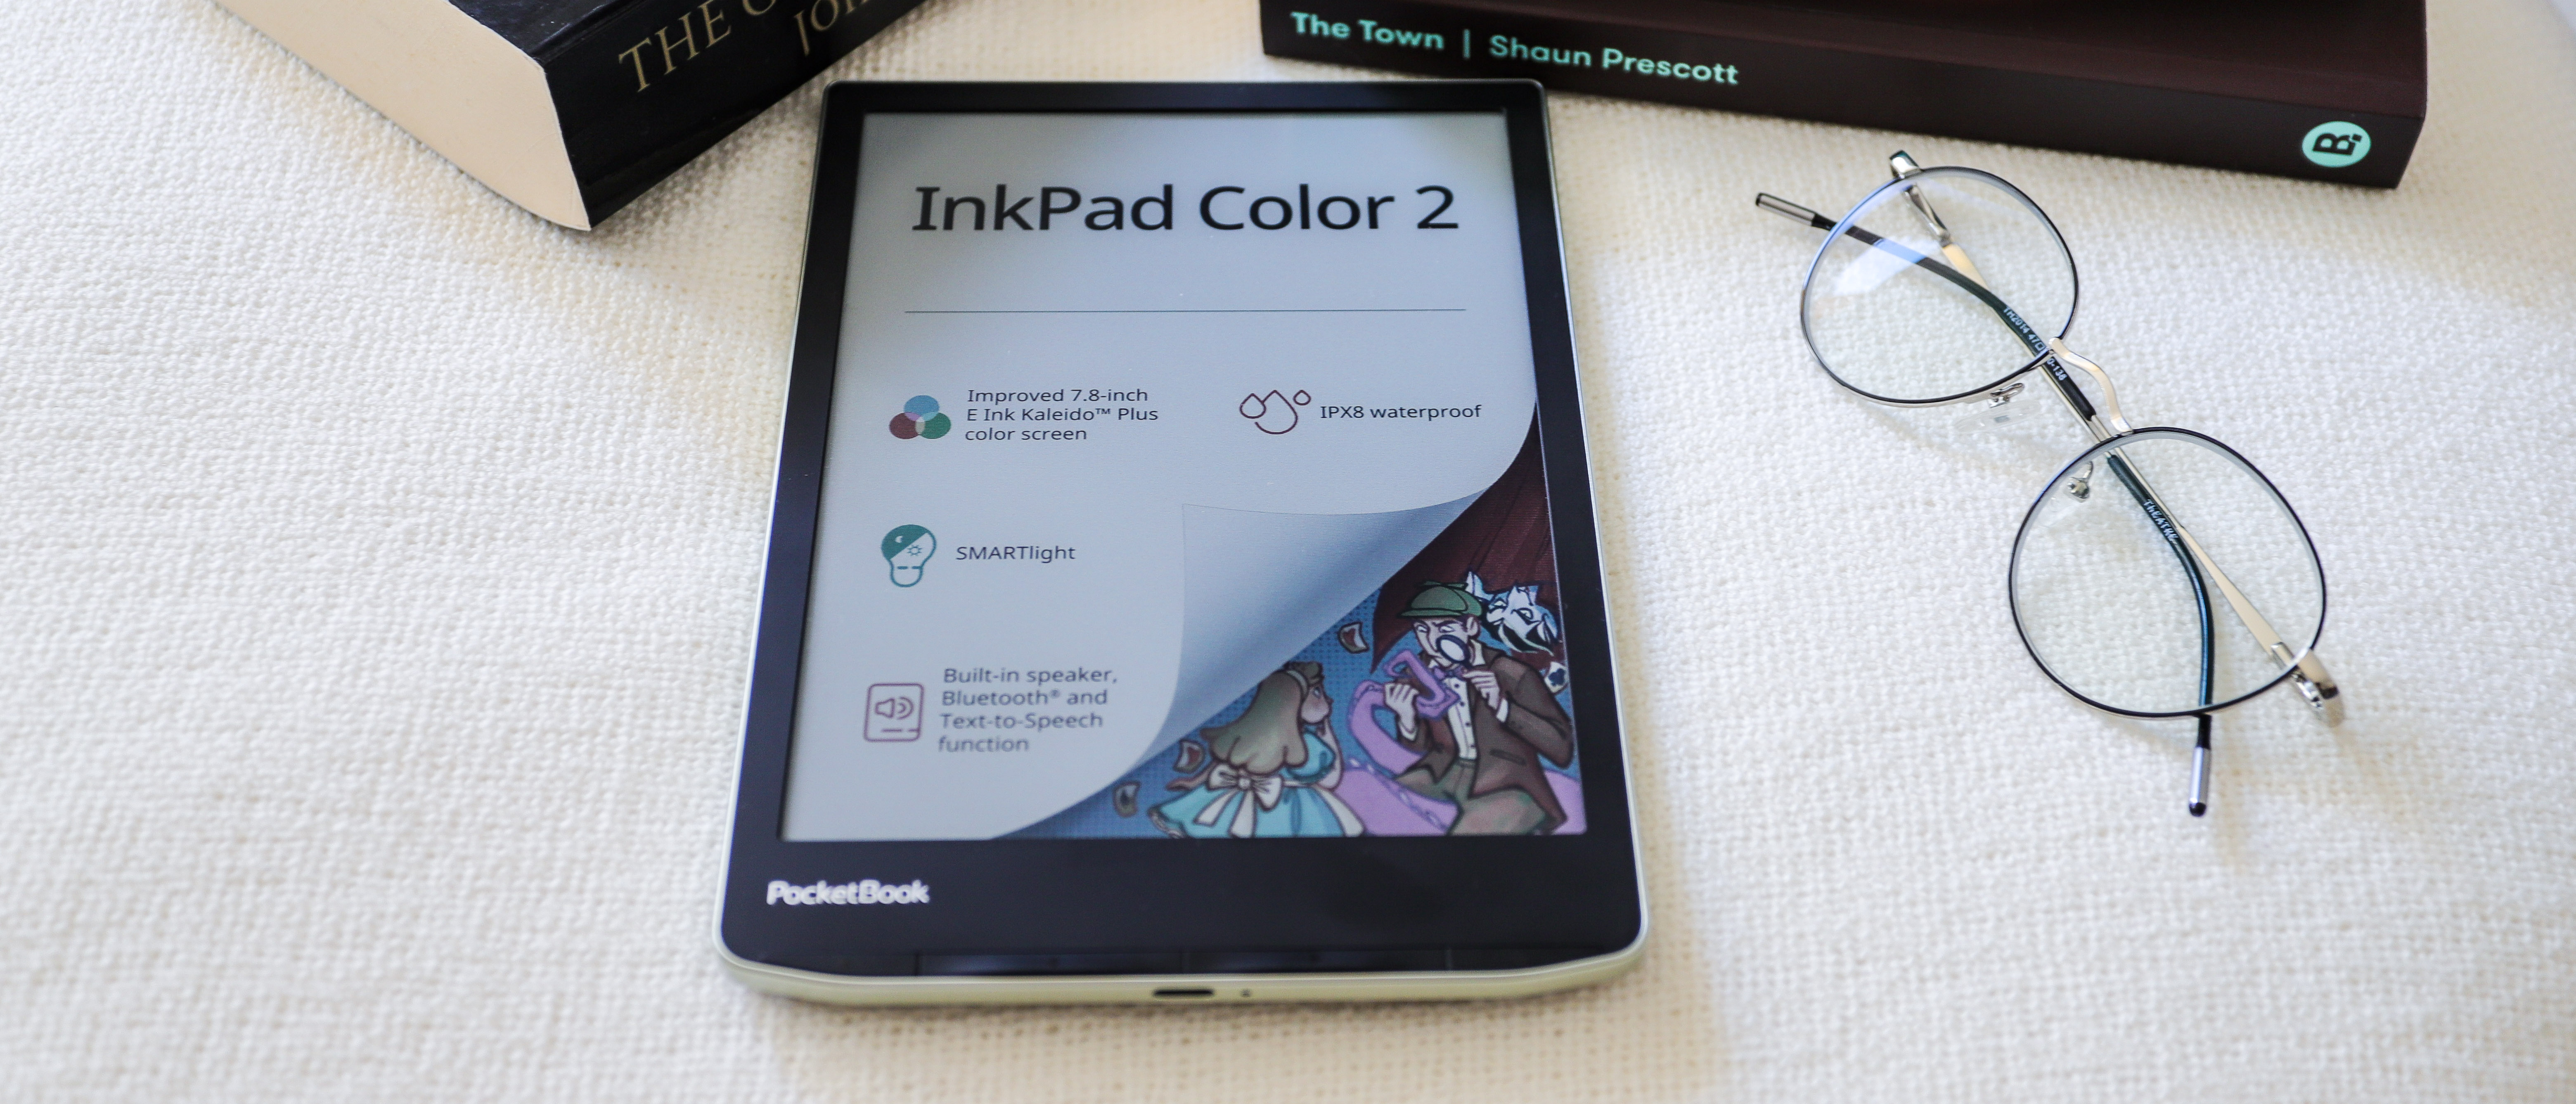 PocketBook InkPad Color 2 review: an old color screen on an